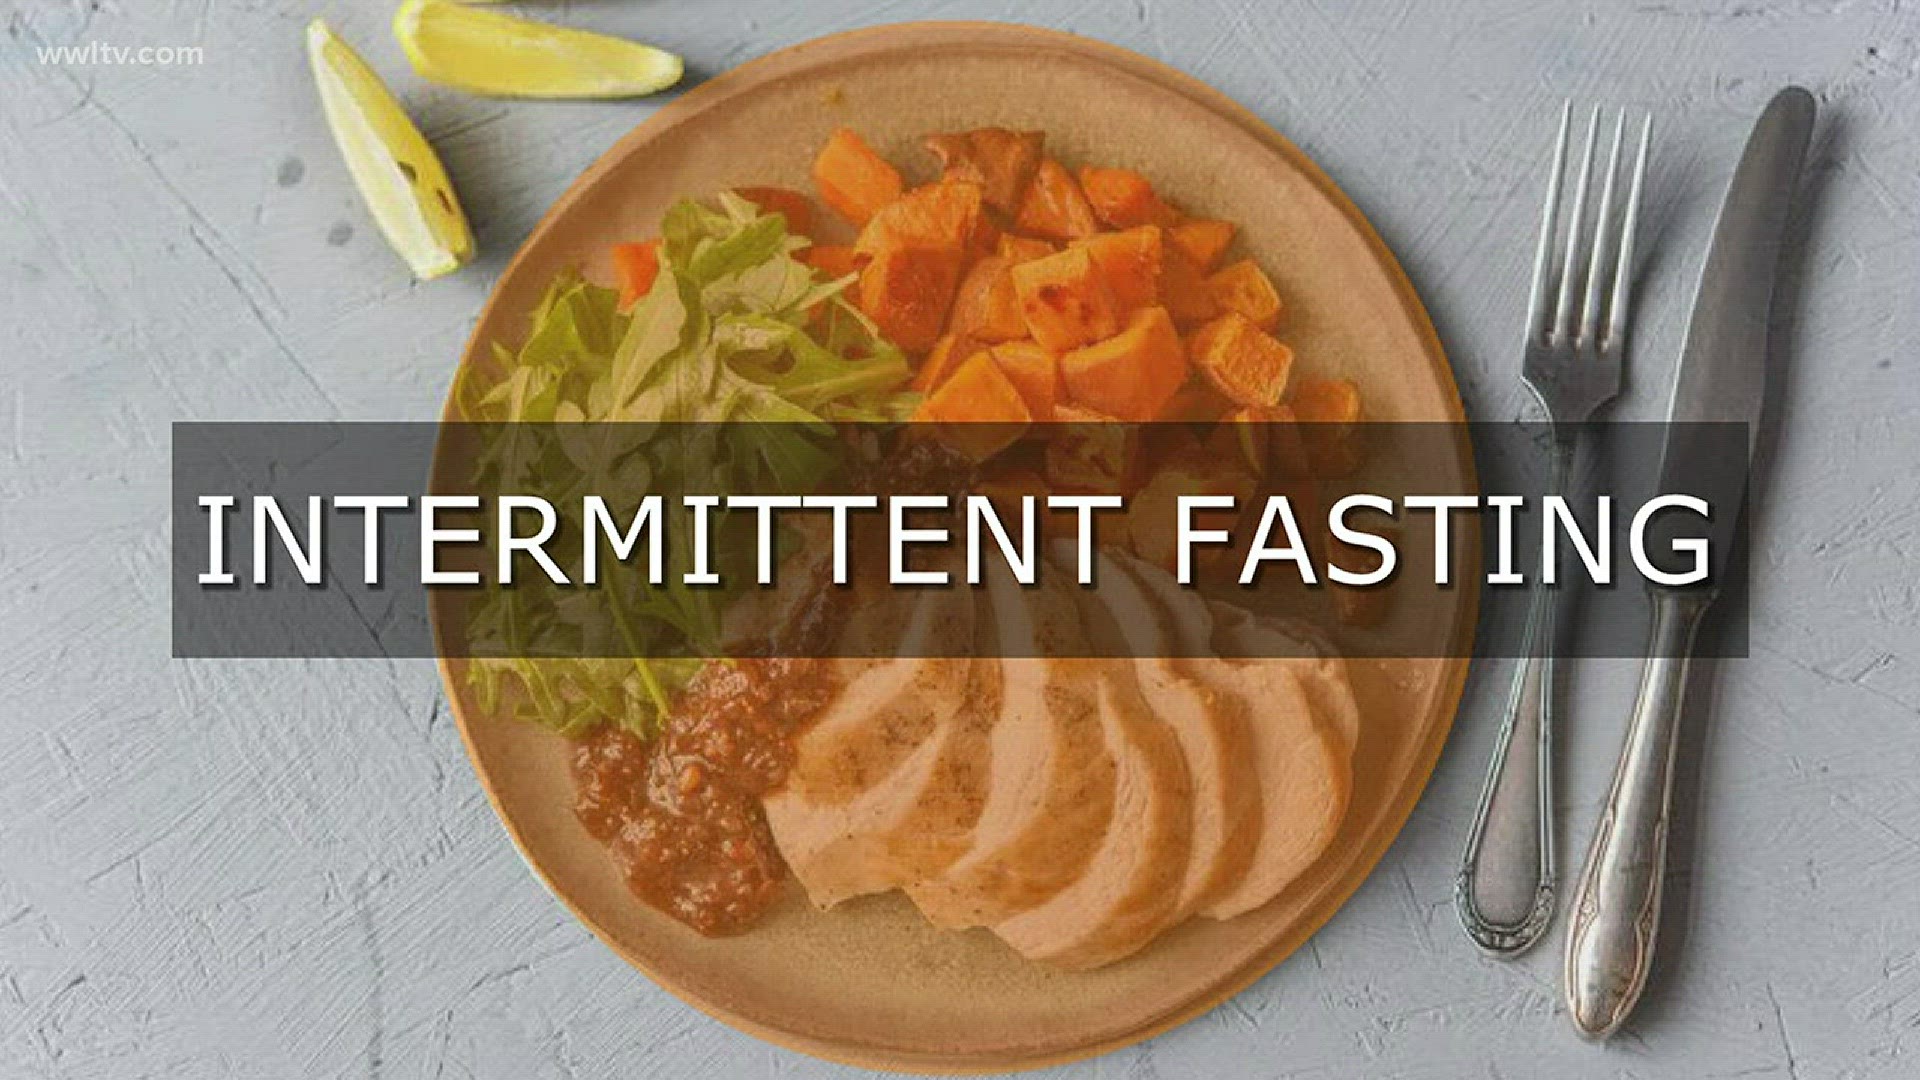 Intermittent fasting comes in many different forms, but basically there is a window of time where you eat, and one where you don't.